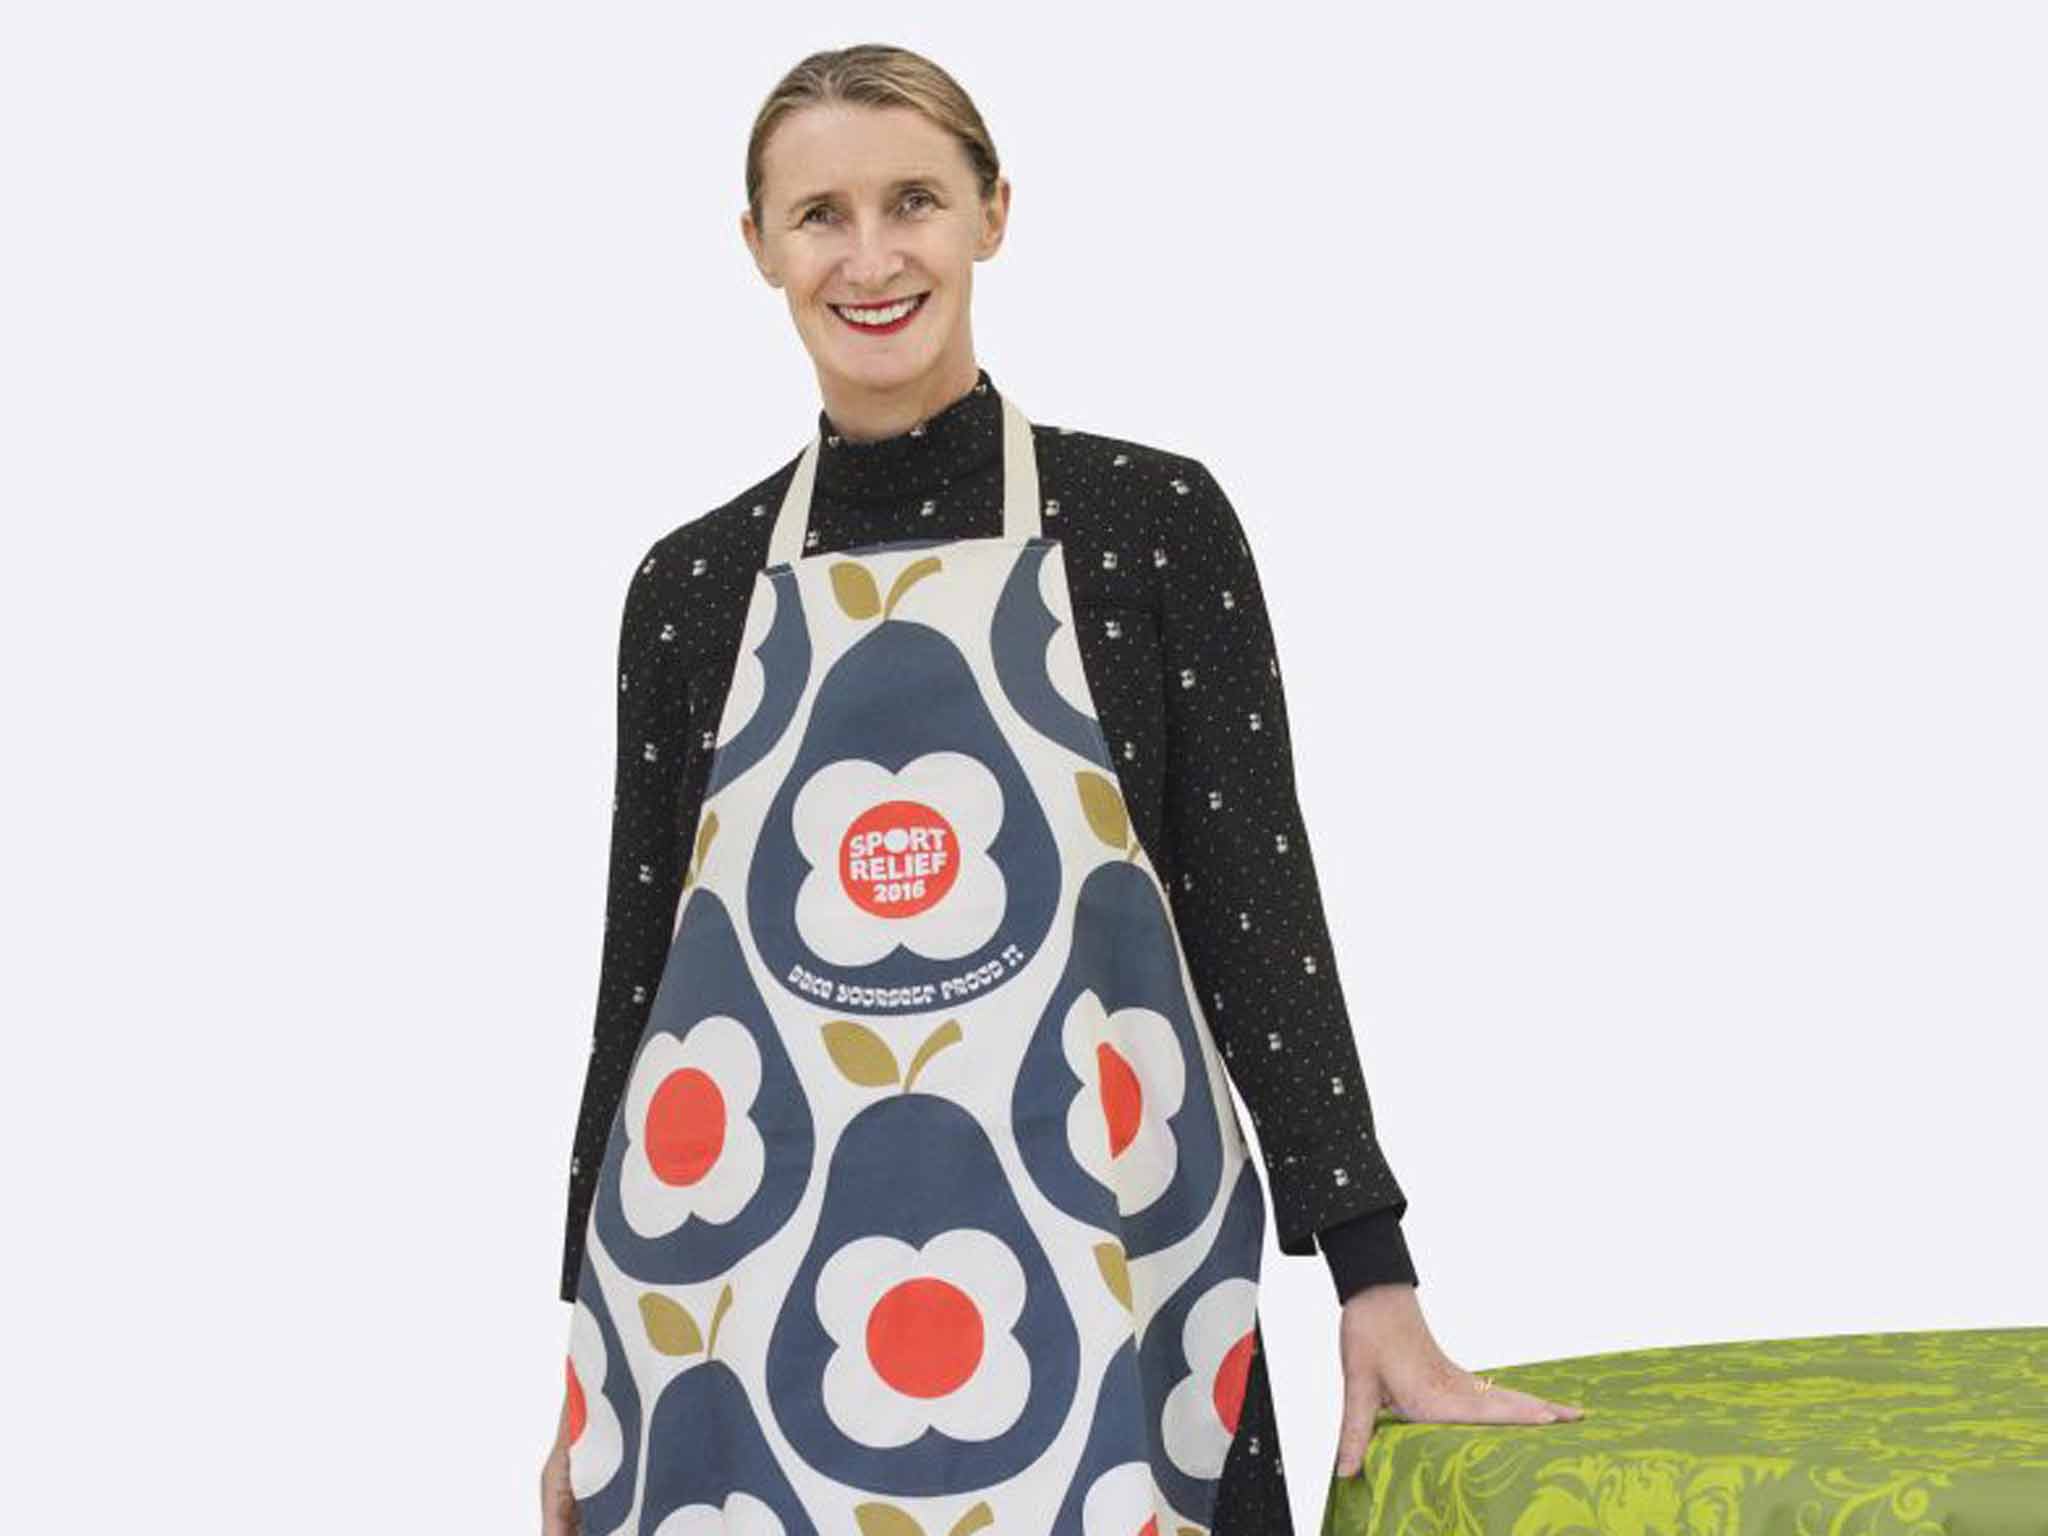 Fashion designer Orla Kiely has created a limited edition apron for Sport Relief 2016